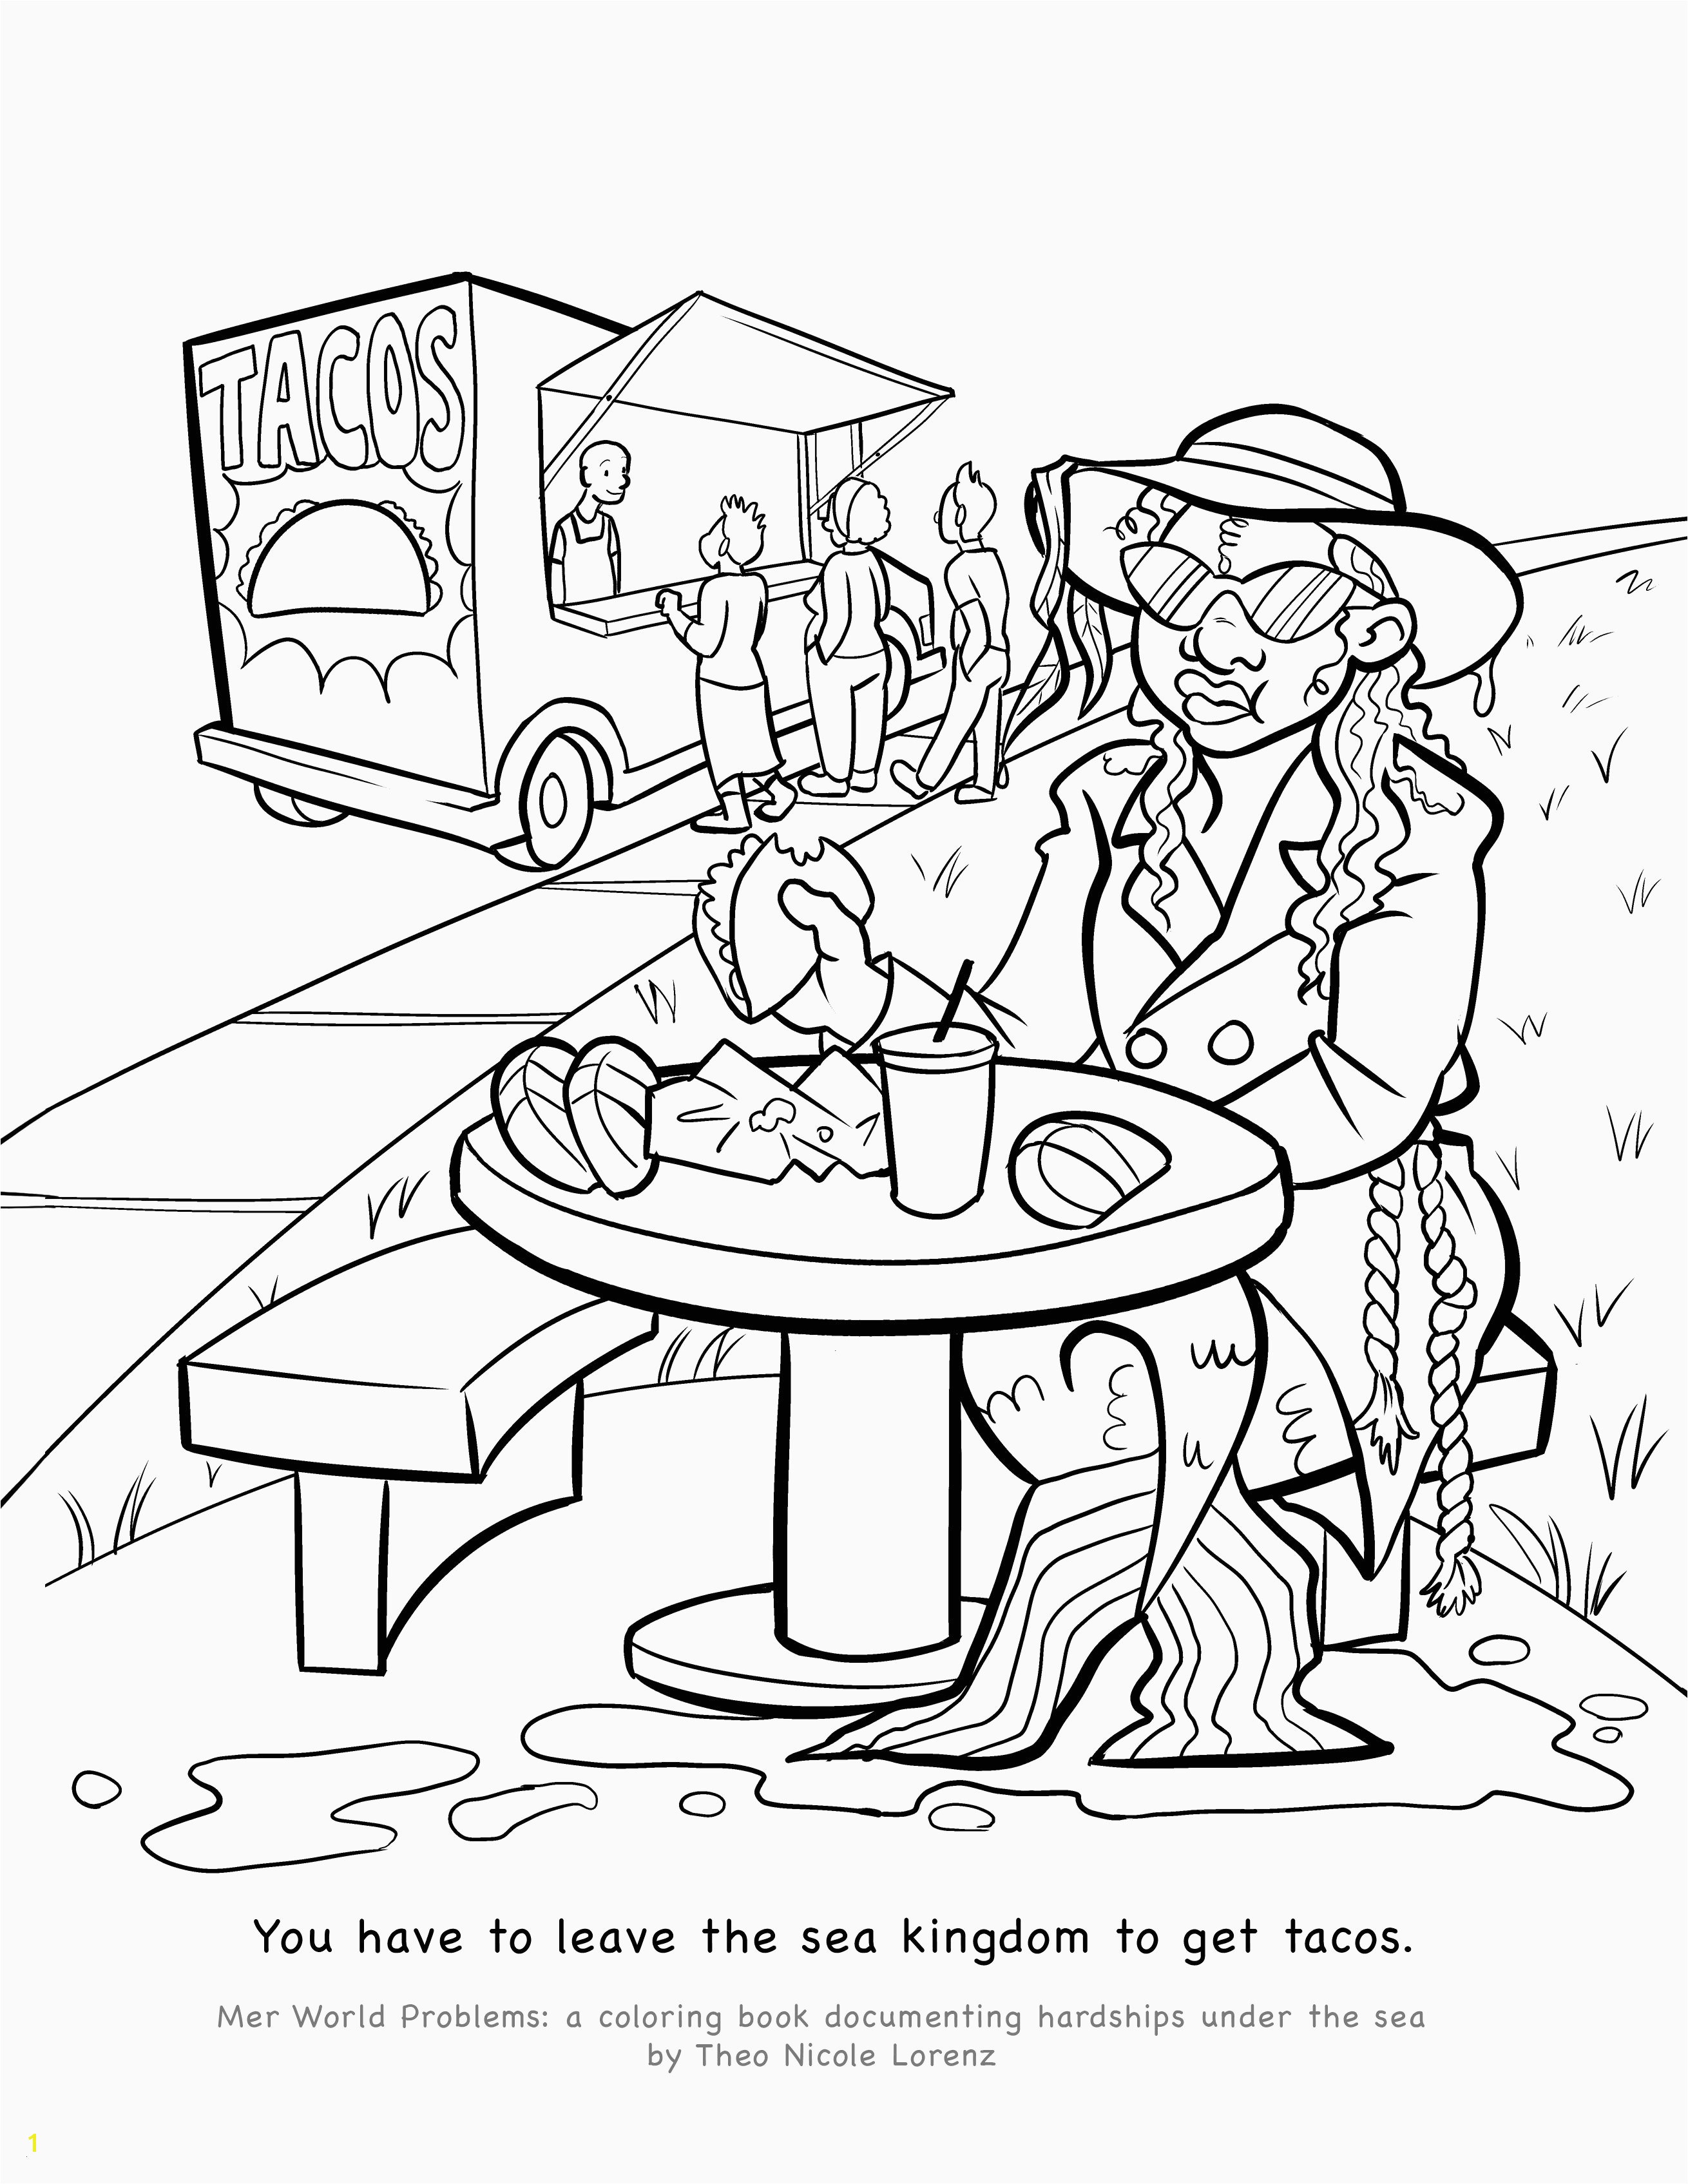 Ten Commandments Coloring Pages Awesome Printable Coloring Pages for Teens Best Cool Od Dogfree